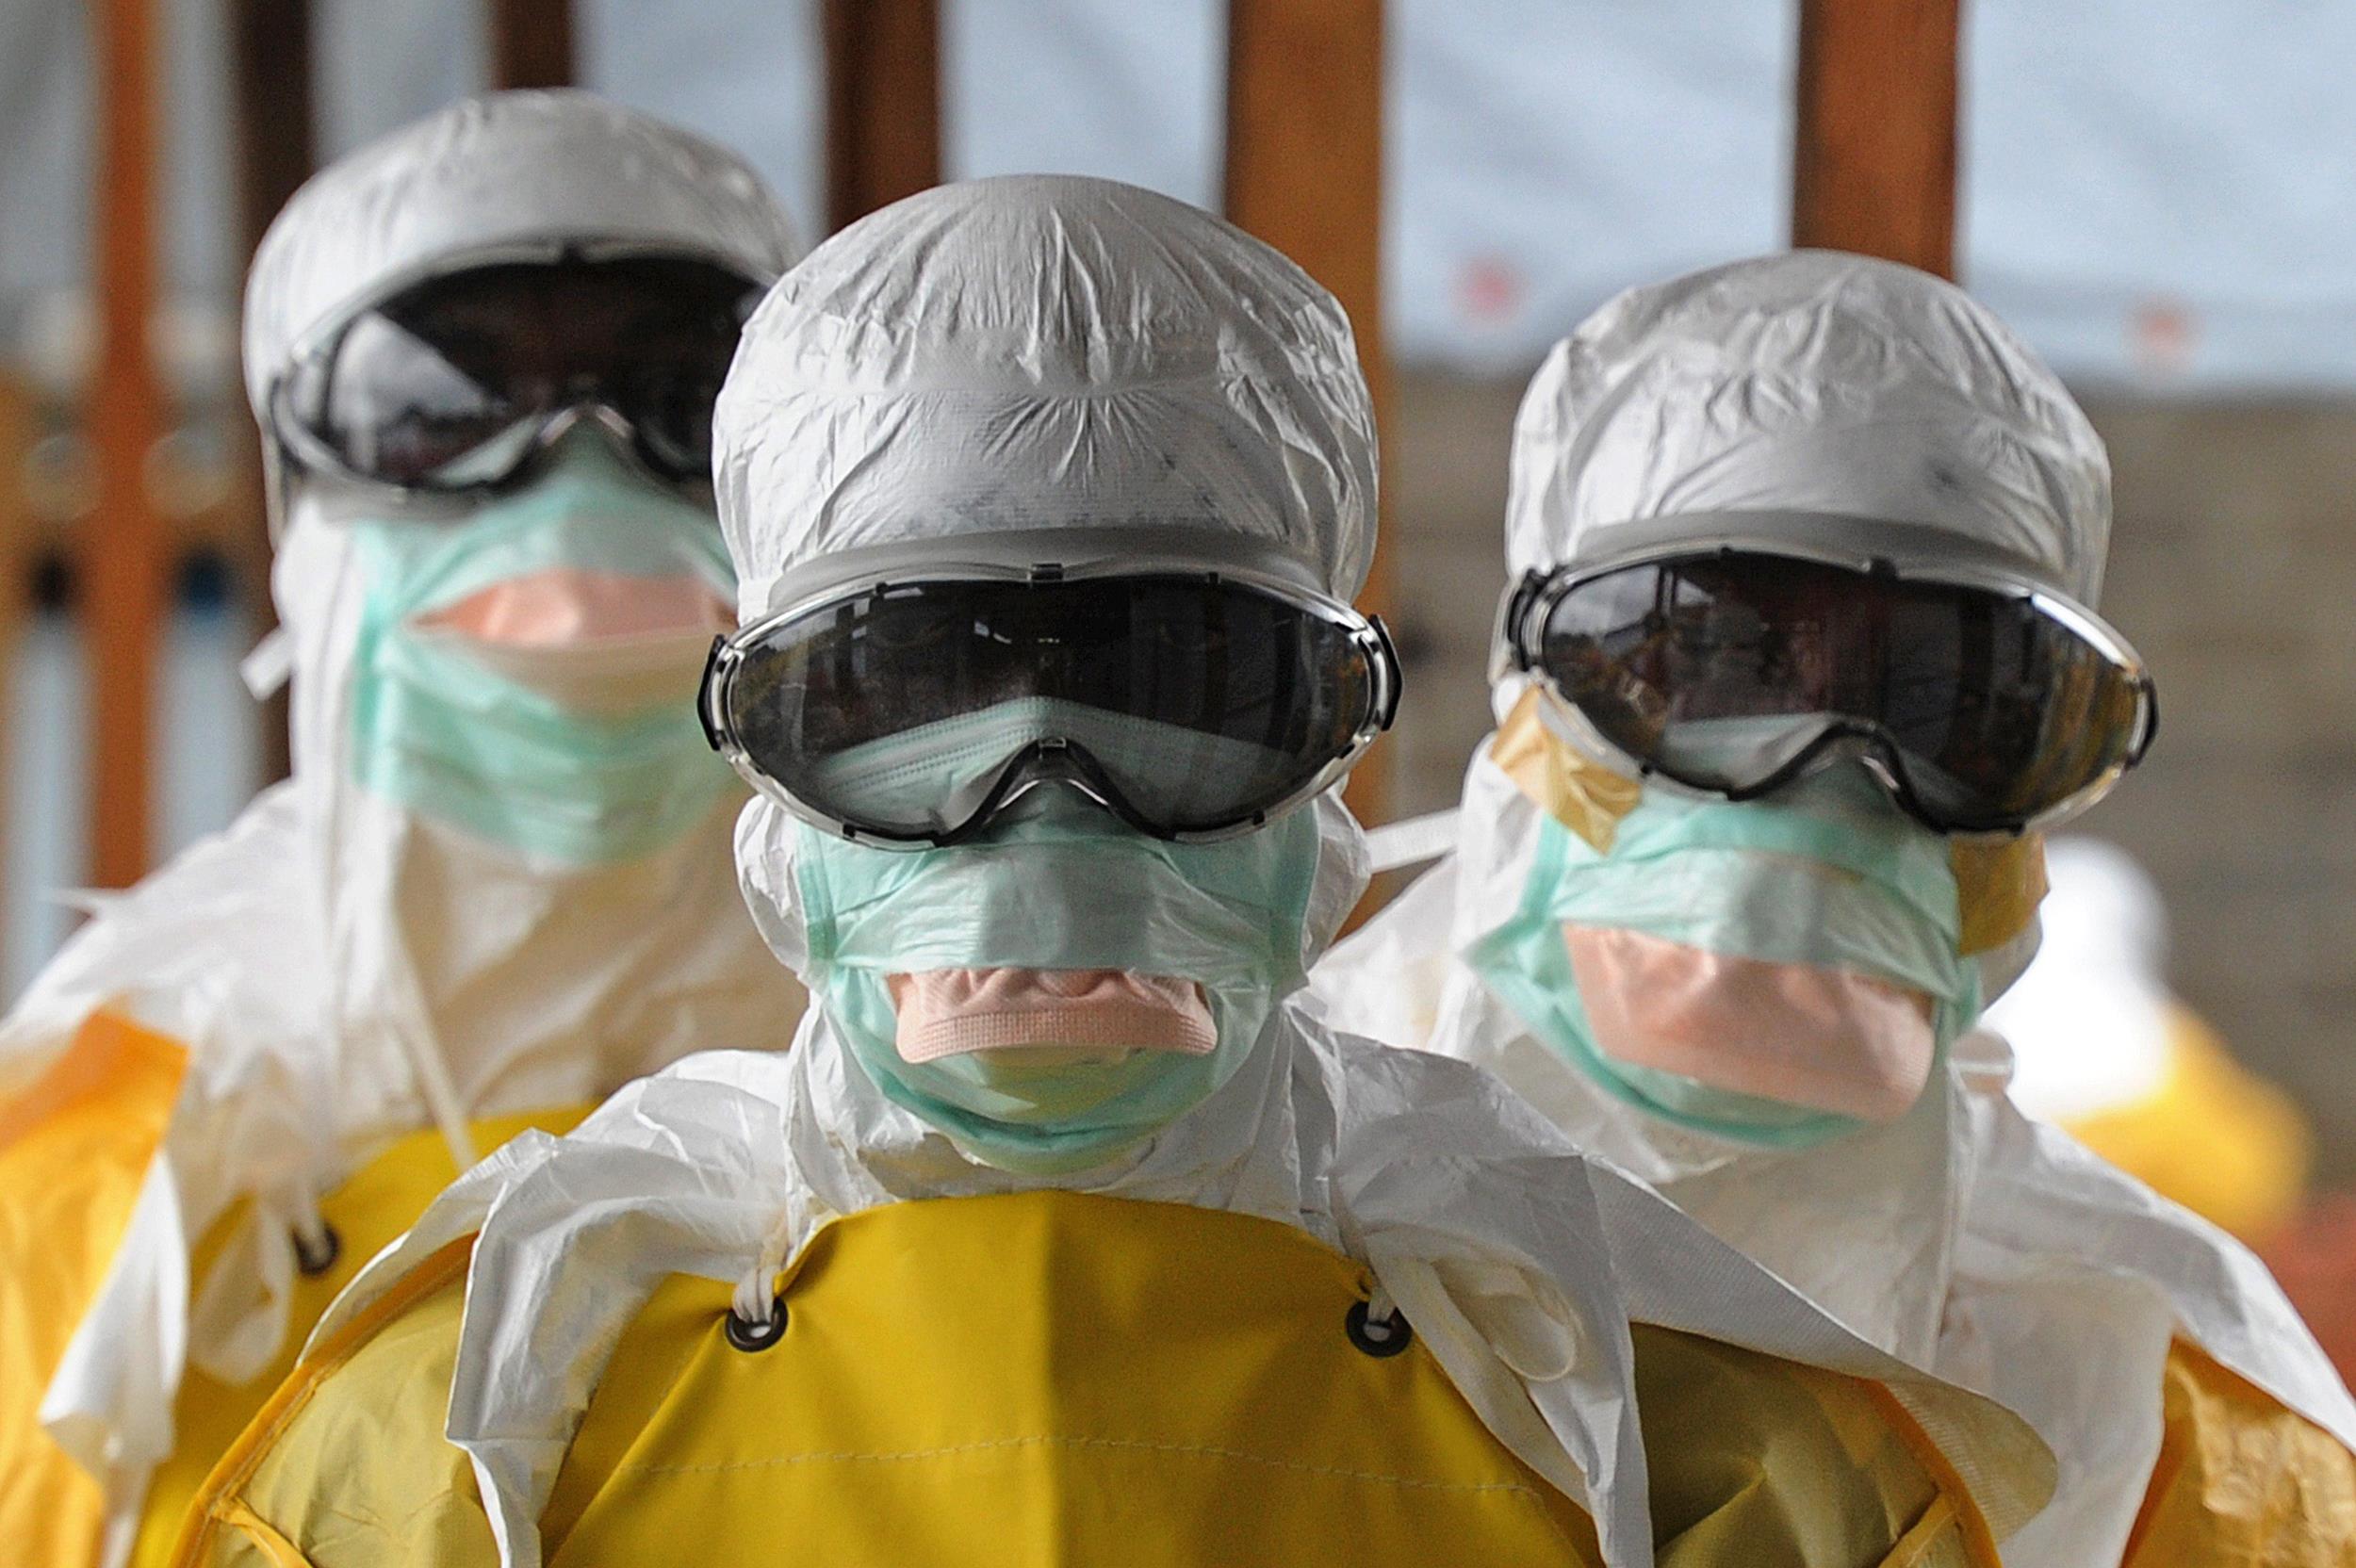 65 Health Workers Quarantined Over Ebola, One Dead